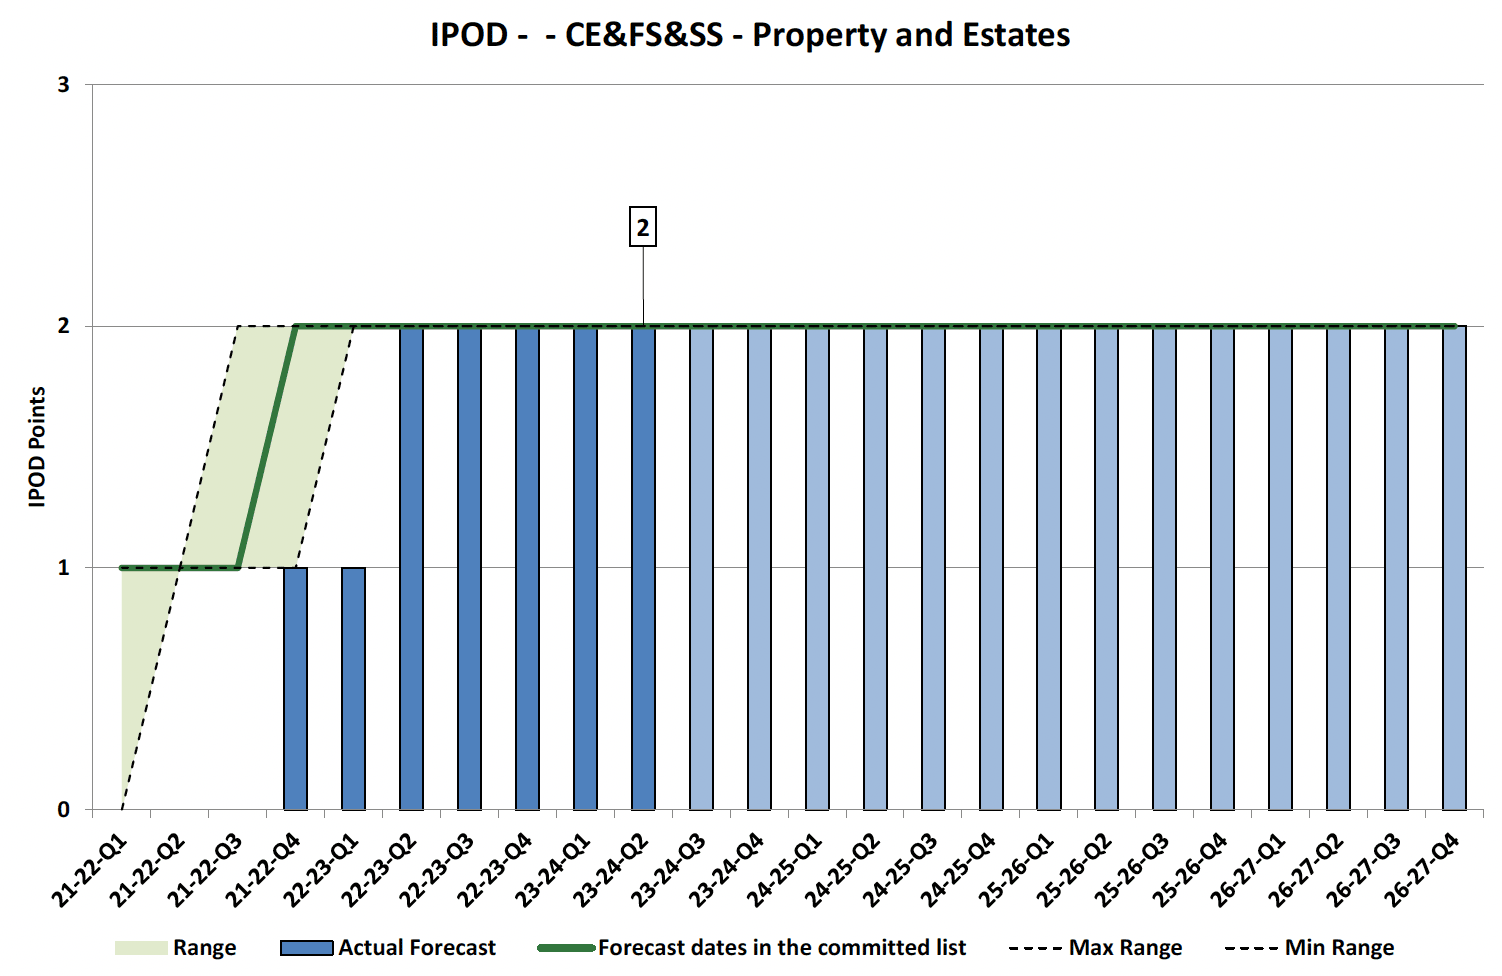 Chart showing IPOD points achieved or forecast for all milestones against target range for Property and Estates Projects in CE&FS&SS Portfolio